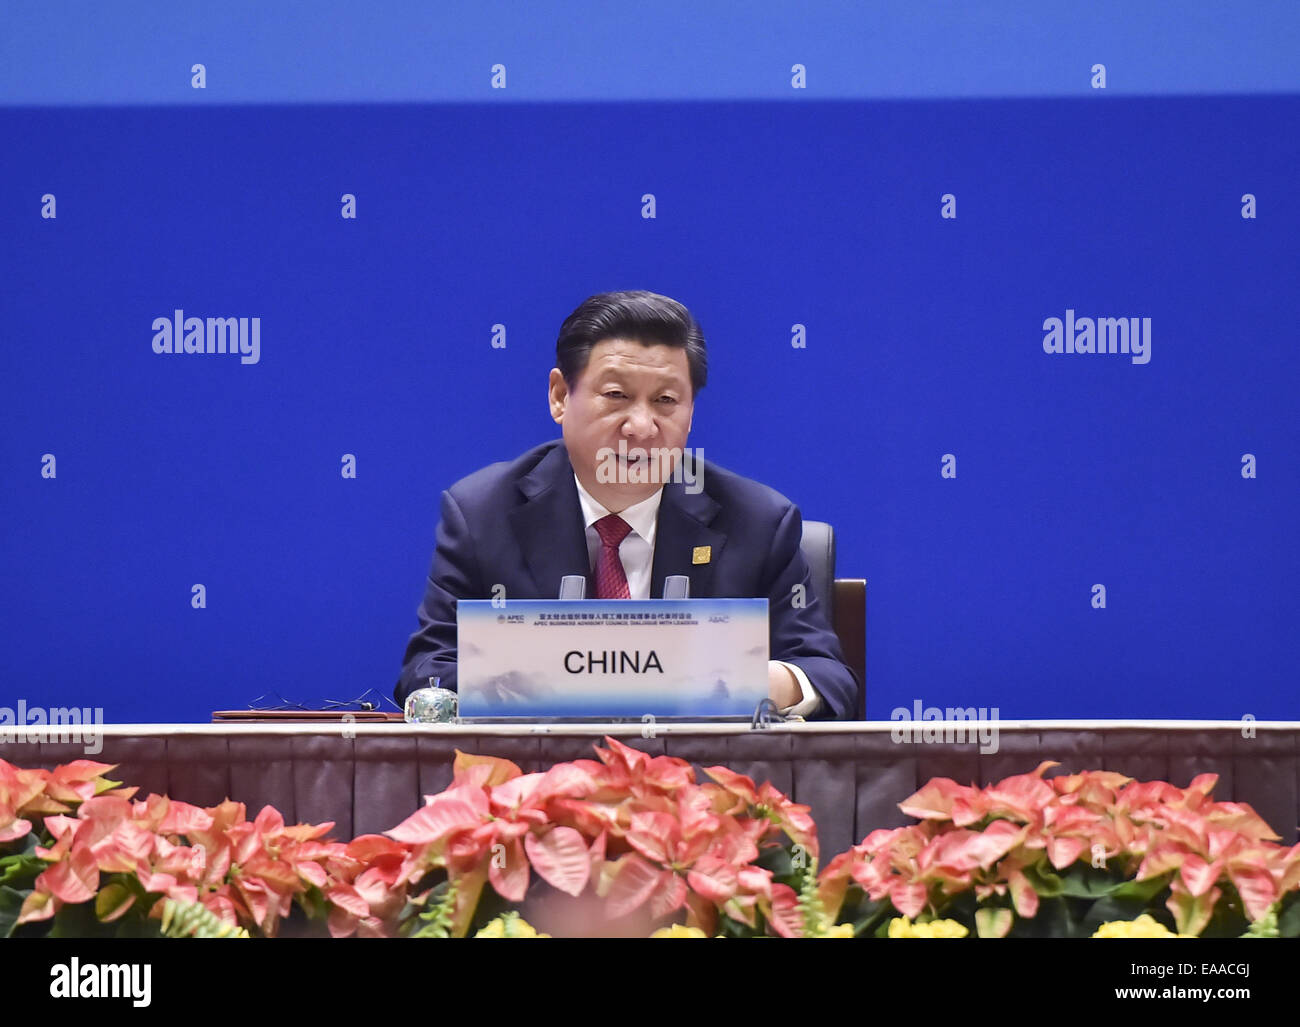 Beijing, China. 10th Nov, 2014. Chinese President Xi Jinping addresses the APEC Business Advisory Council Dialogue With Leaders in Beijing, China, Nov. 10, 2014. © Li Tao/Xinhua/Alamy Live News Stock Photo